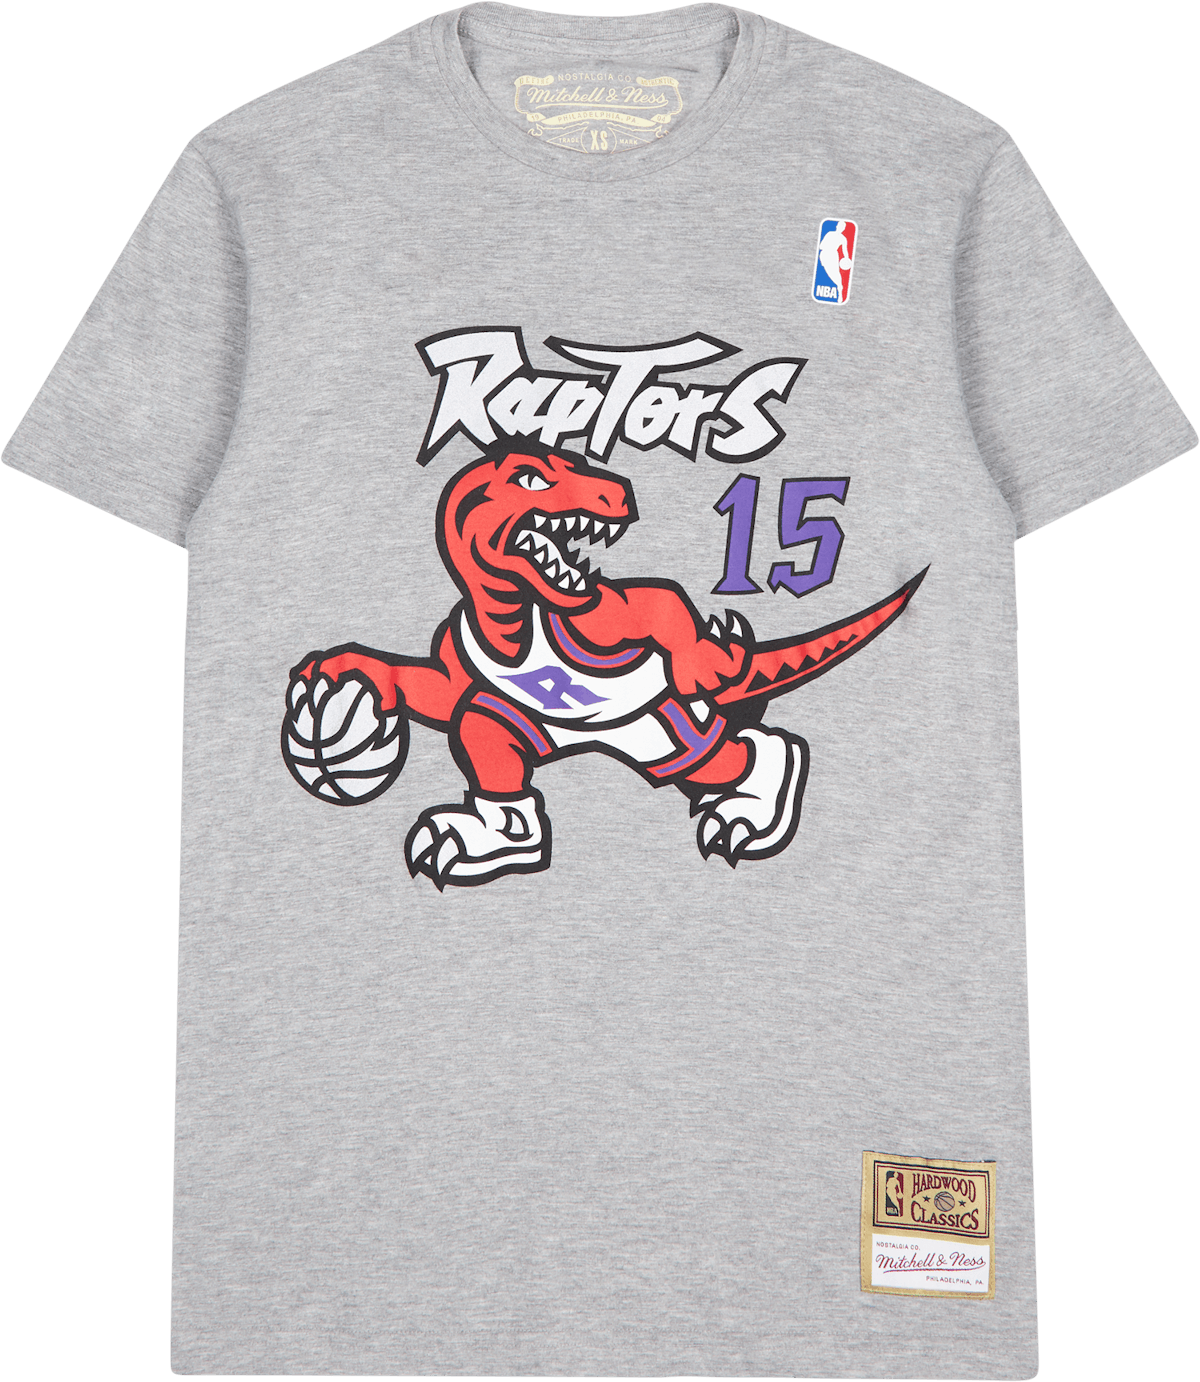 Name & Number Tee - Vince Carter